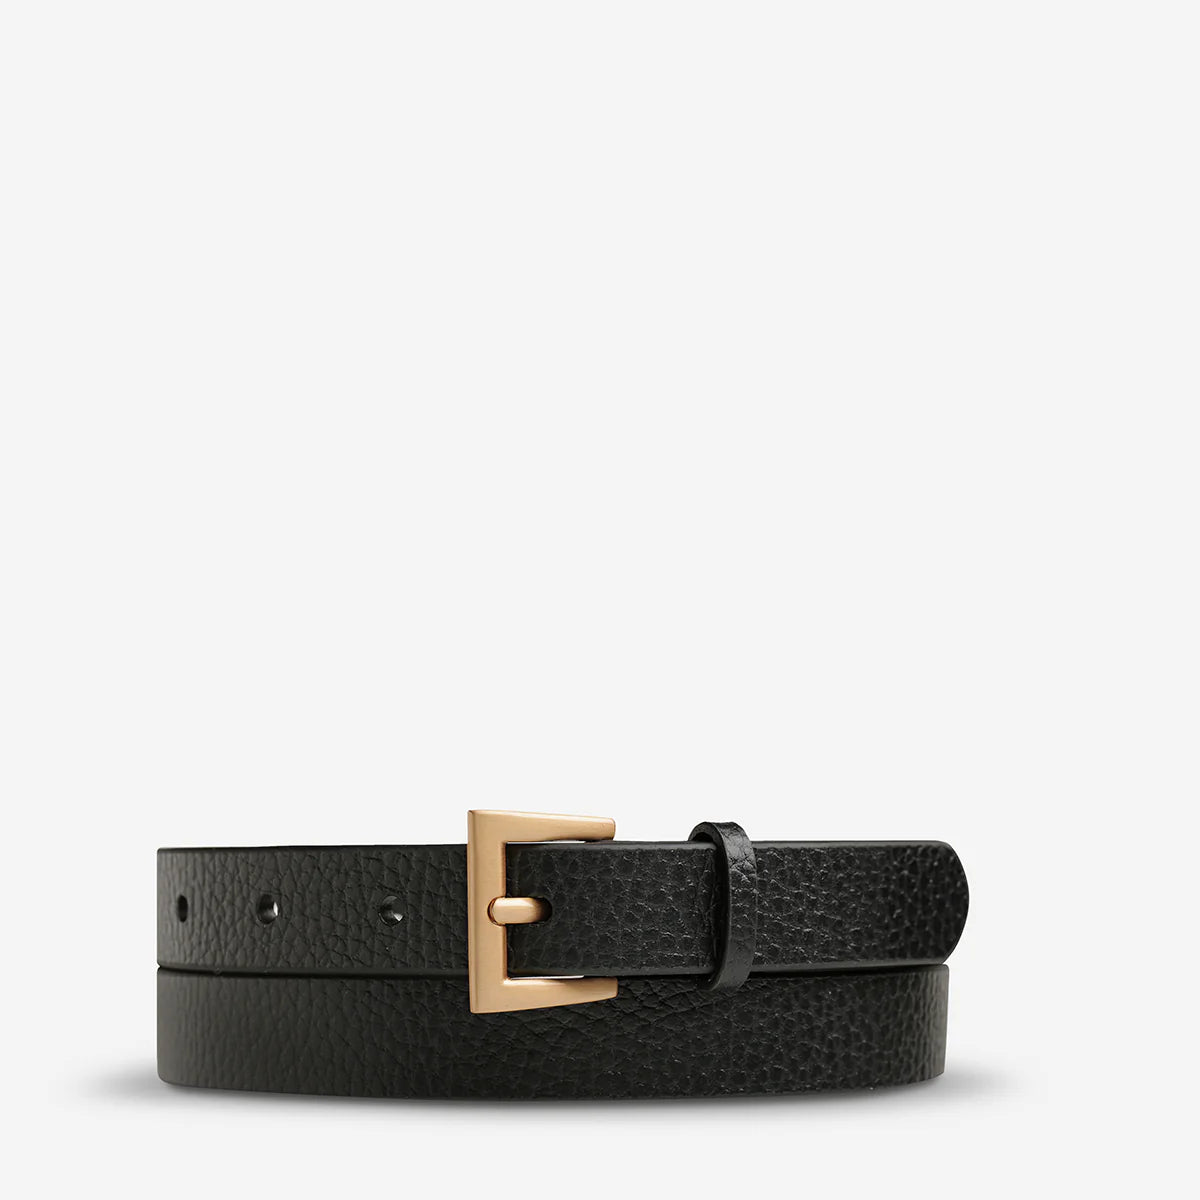 status-anxiety-belt-part-of-me-black-gold-front_d8162d27-0bfd-4be8-ba03-98ce96085717.webp